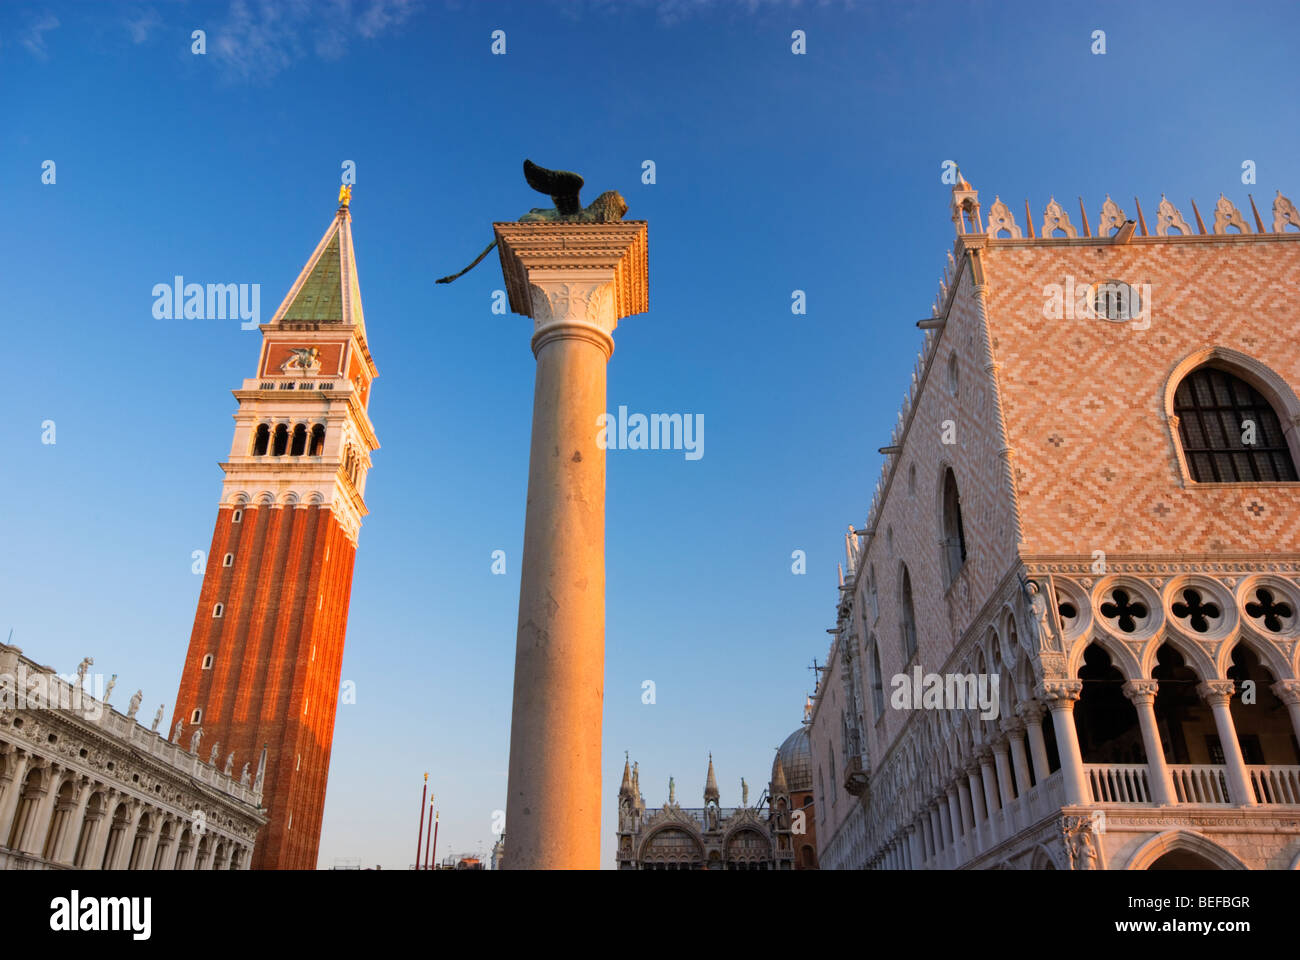 Horizontal View of The Piazza San Marco at sunrise, showing the Campanile, pillar and buildings Stock Photo